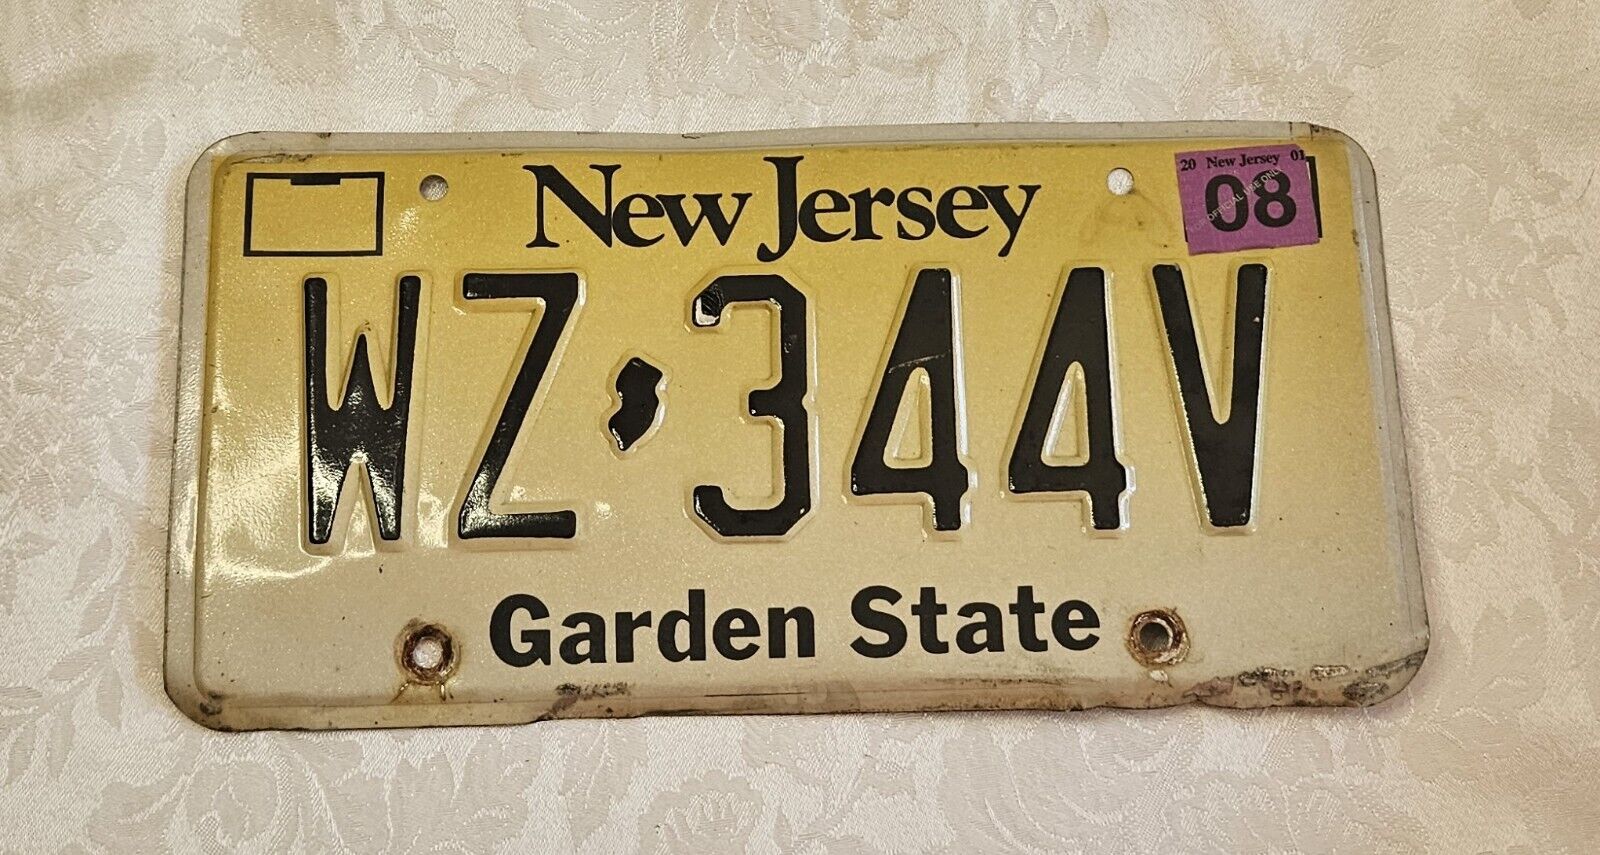 90s New Jersey Garden State License Plate WZ 344V